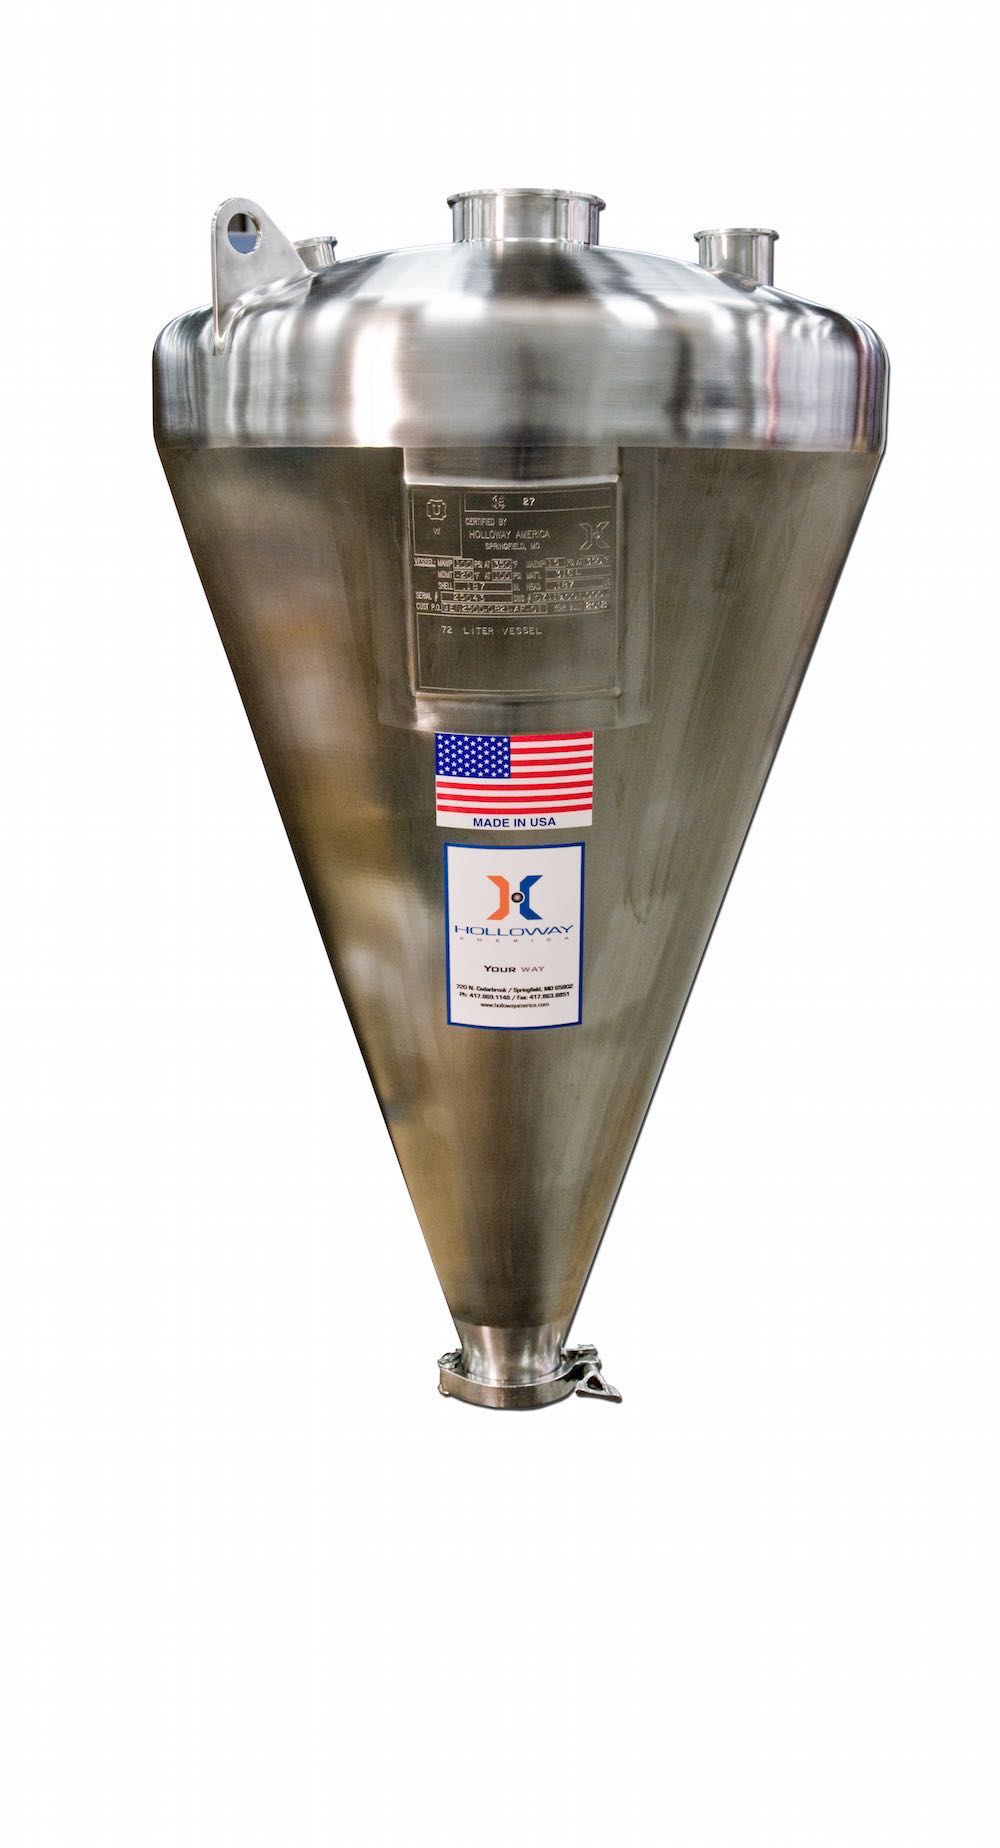 Ask HOLLOWAY AMERICA about its stainless steel mixing tanks and other vessels, like the one shown here.